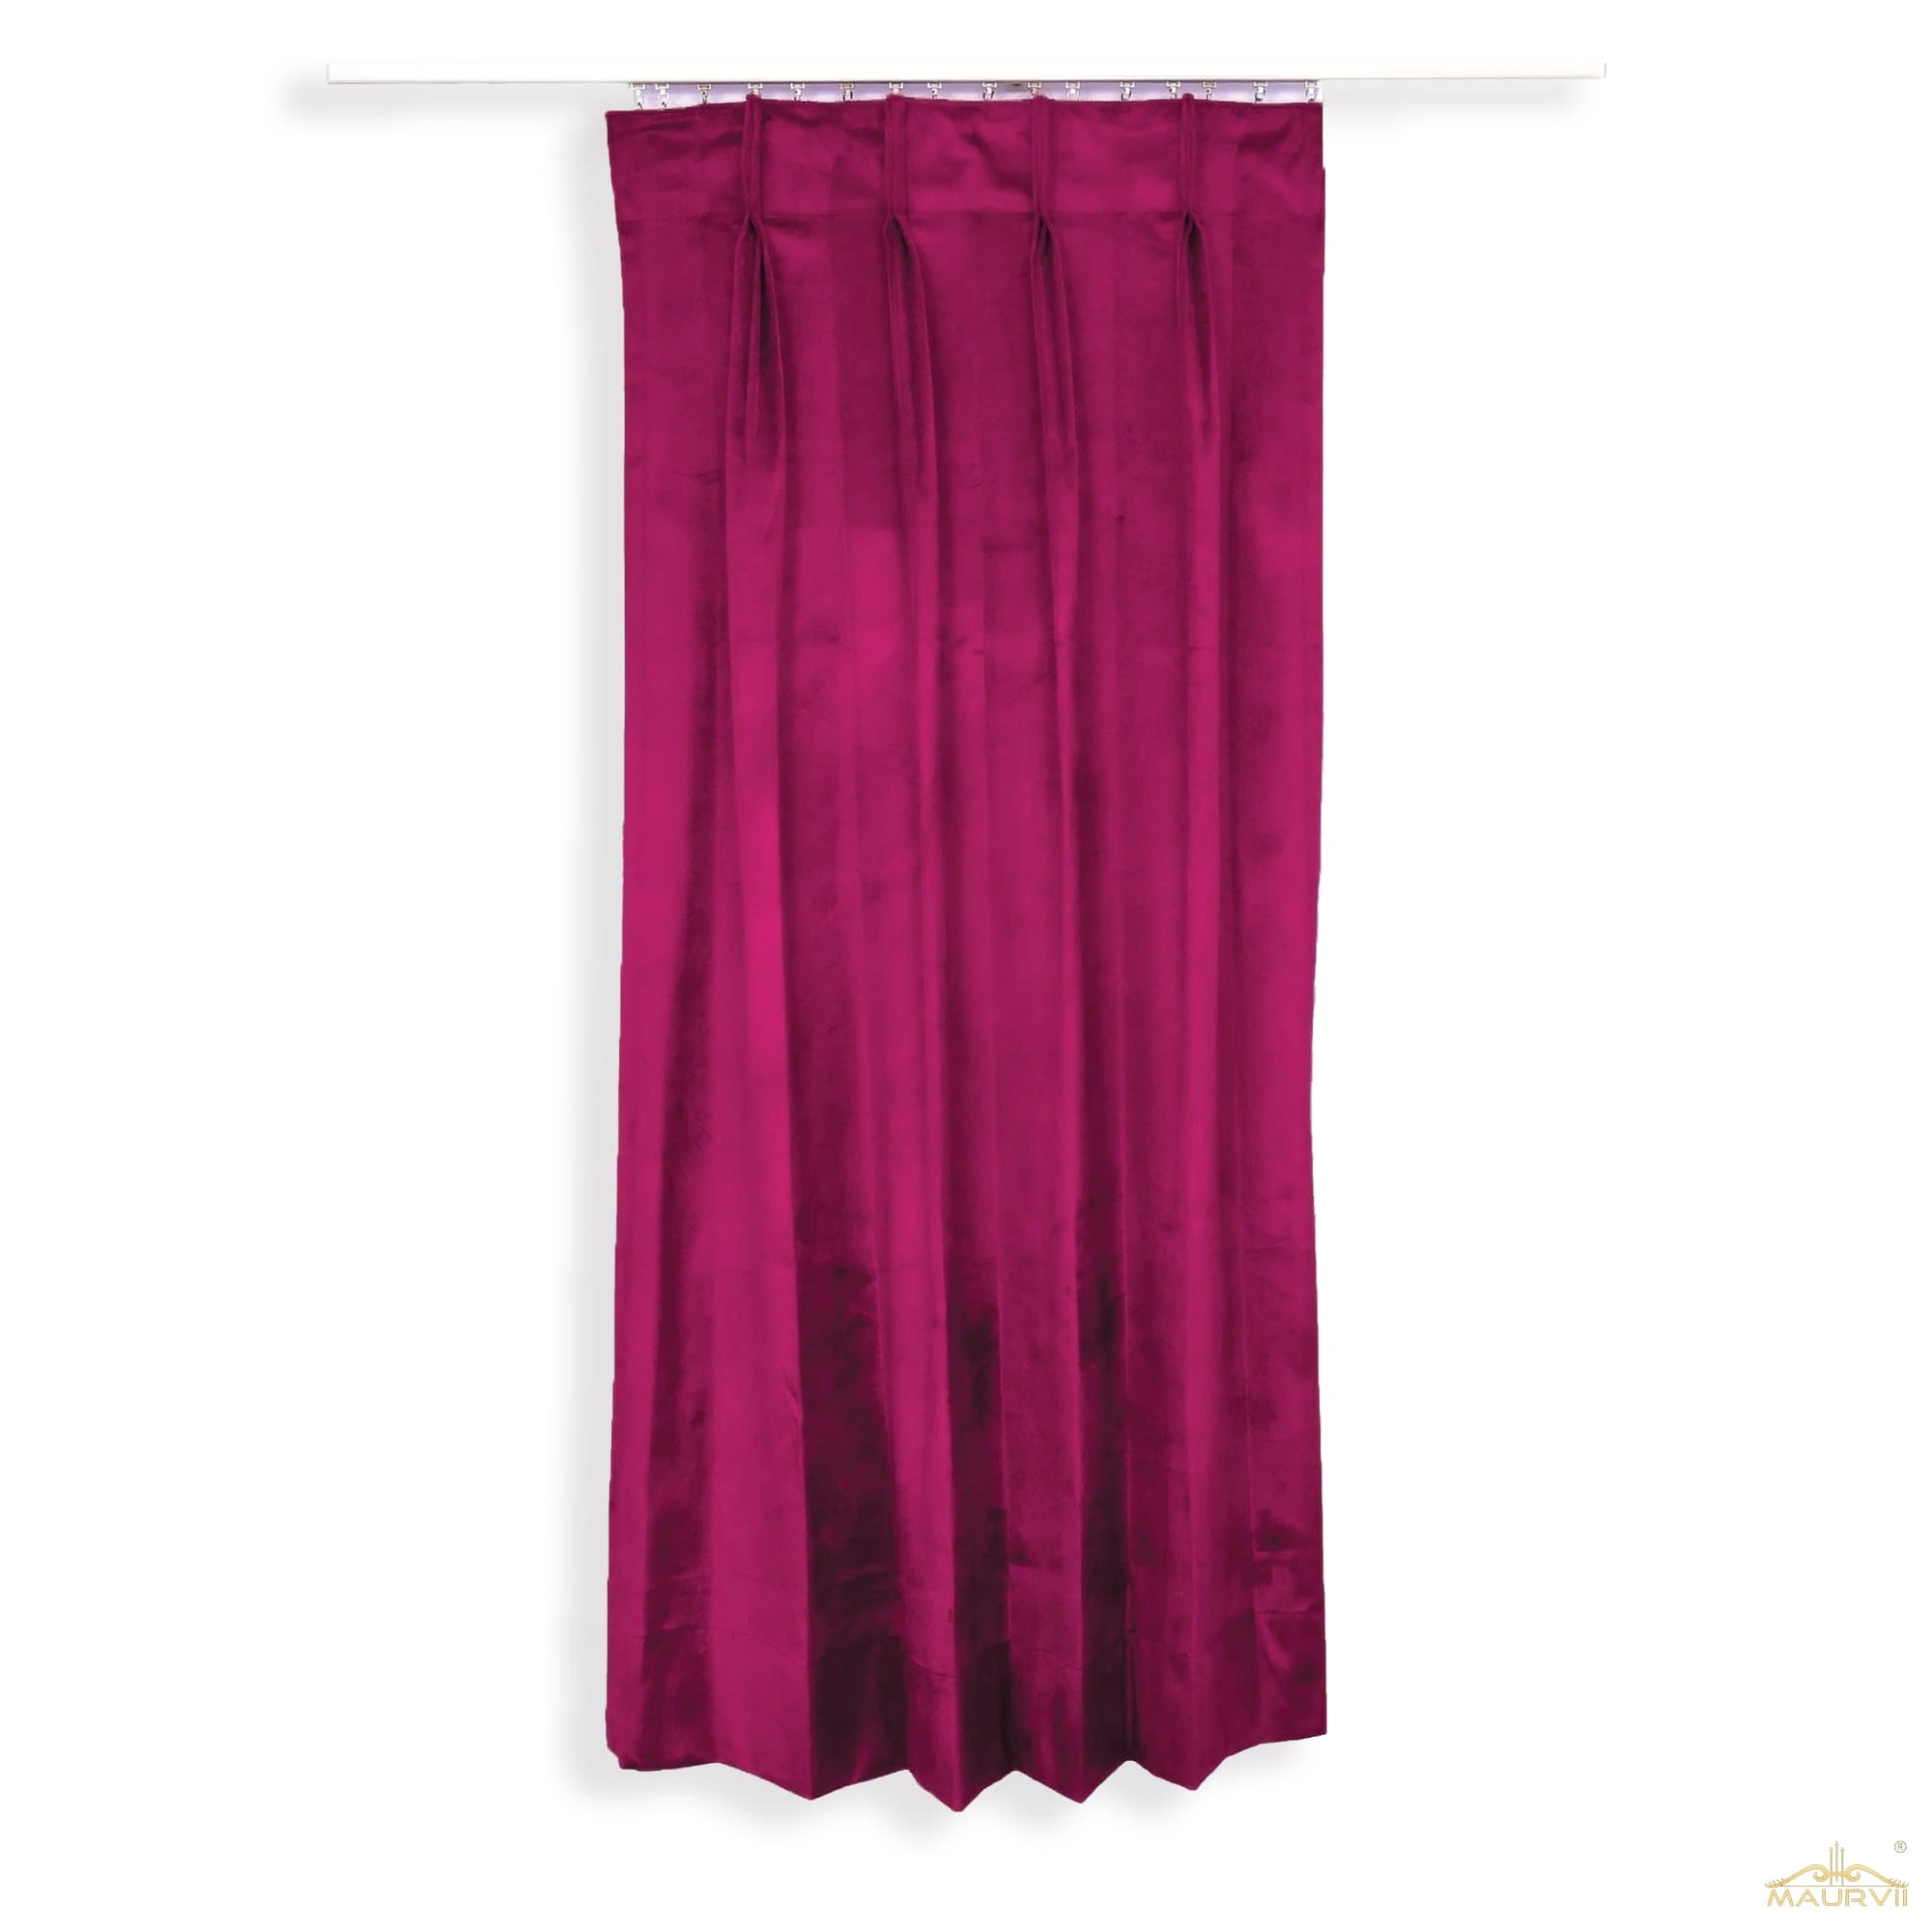 Violet red drapes for home theater